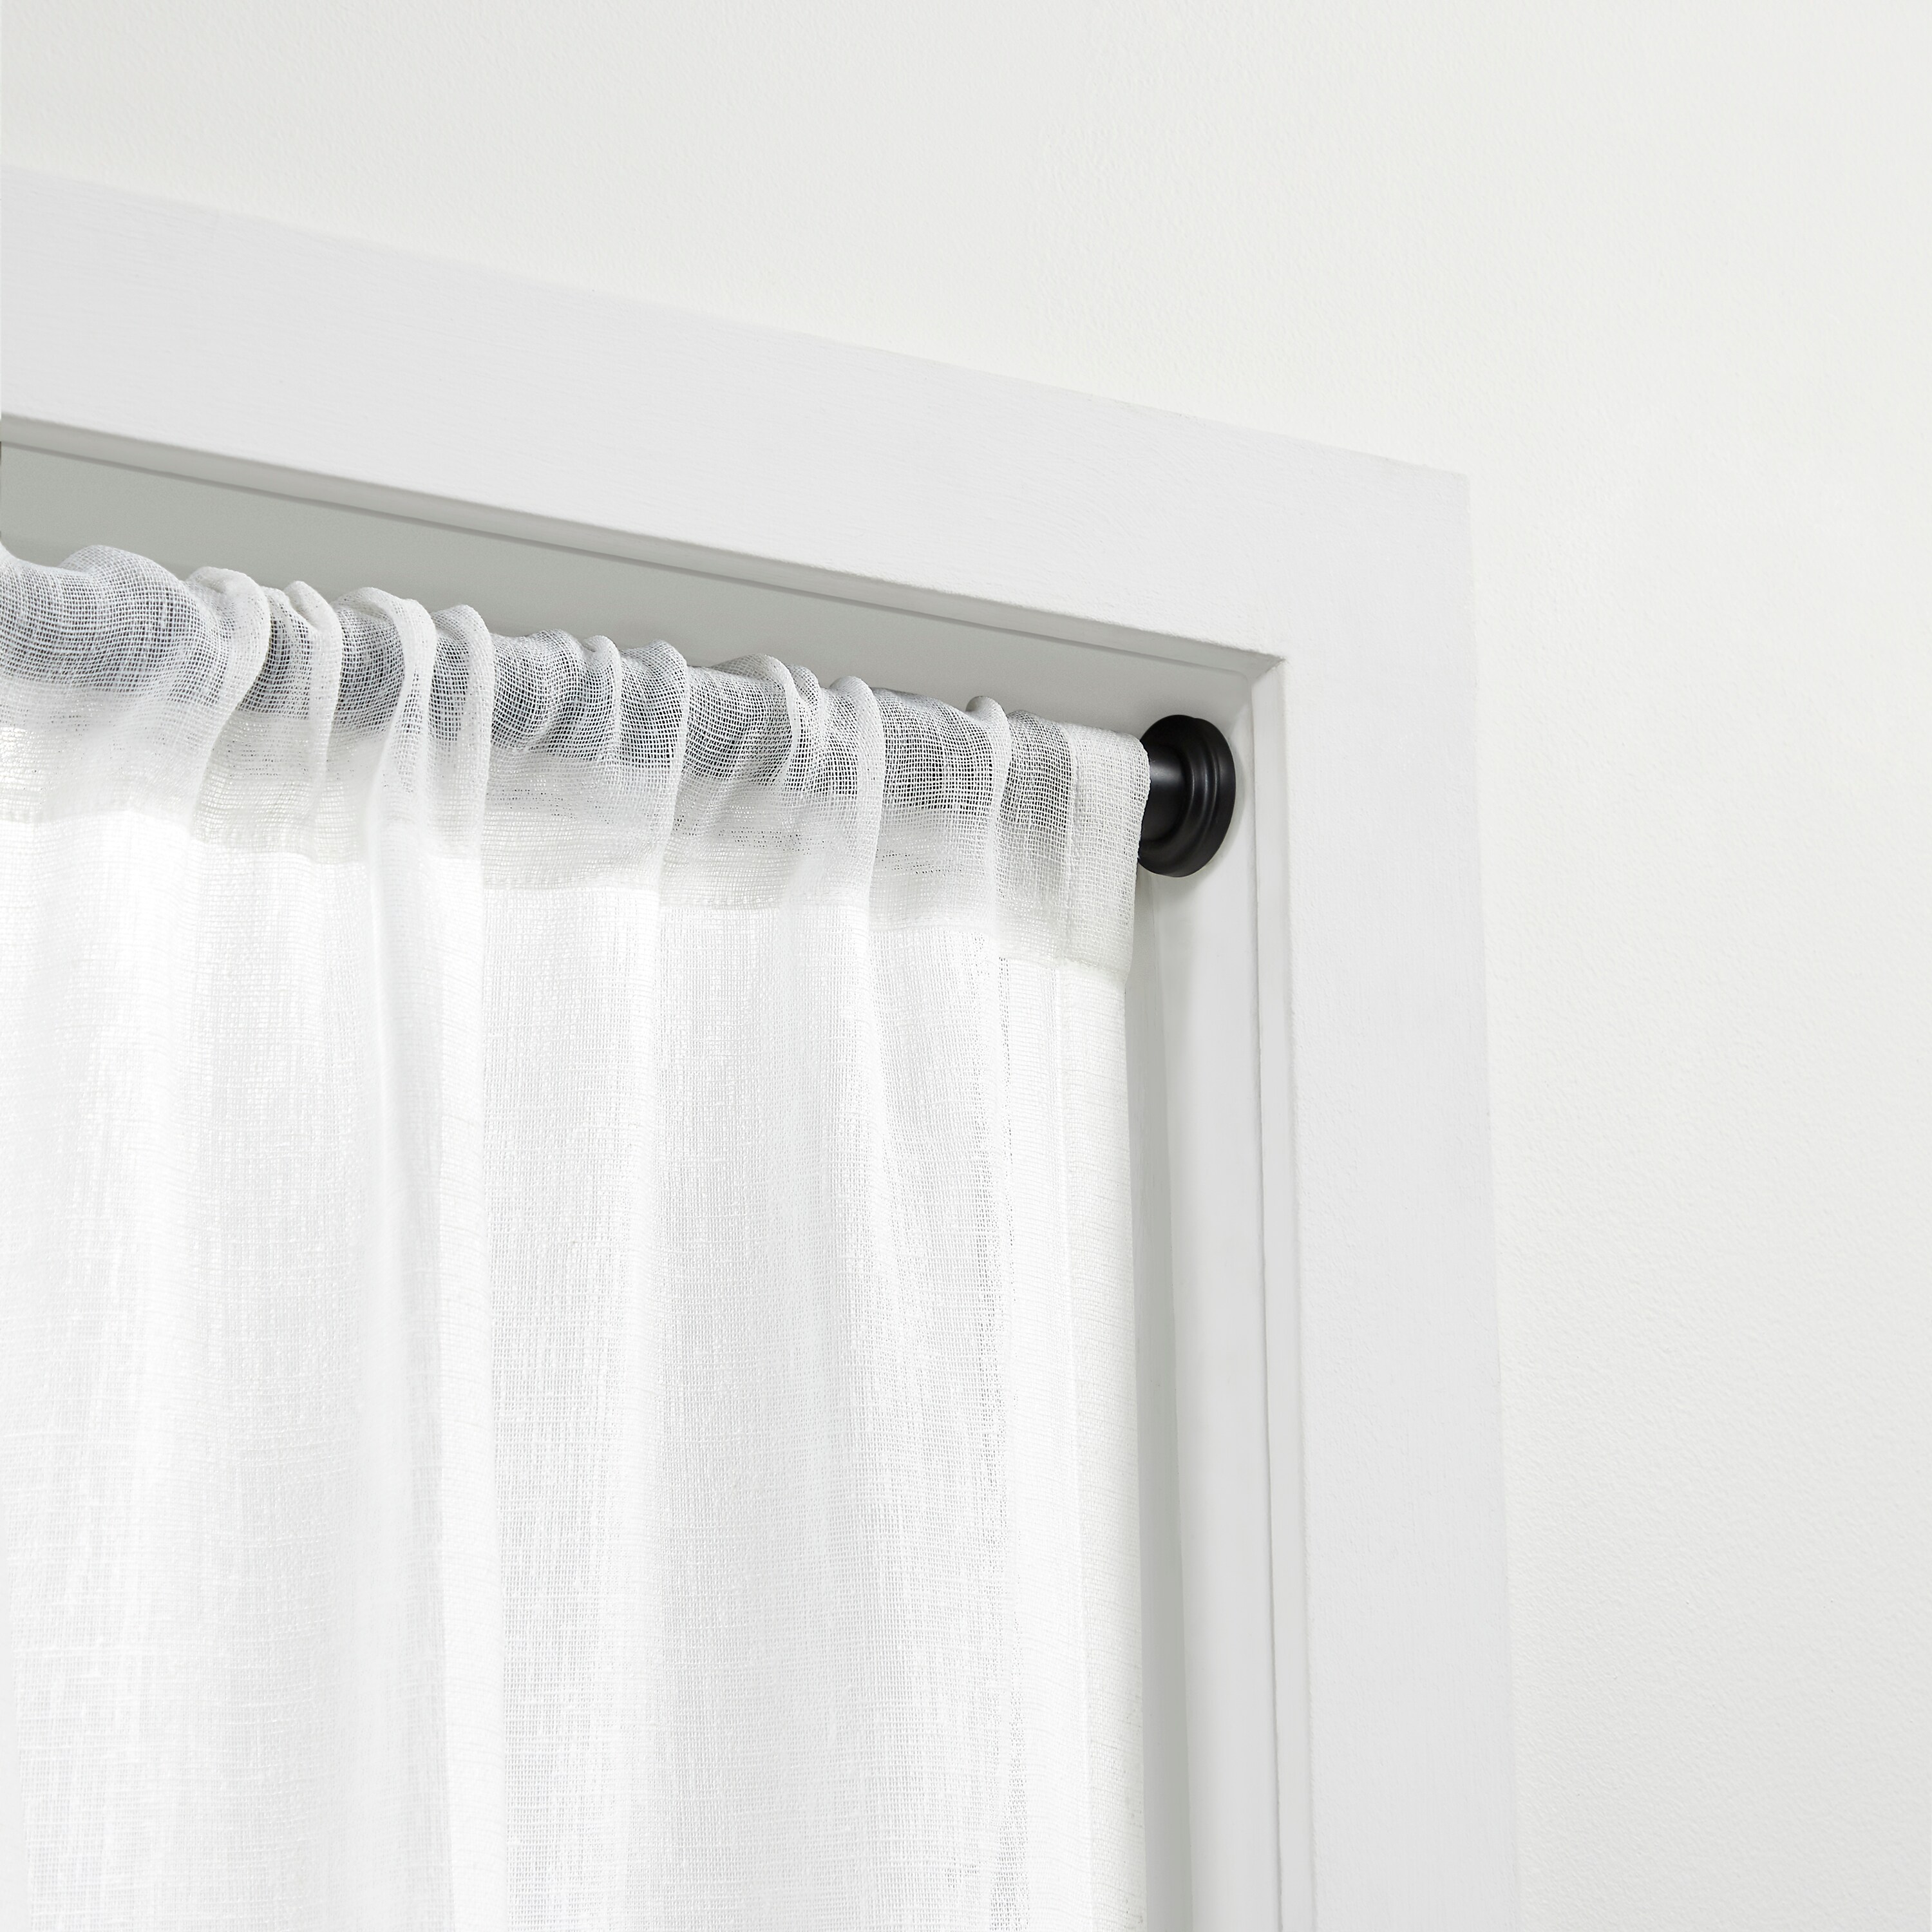 48" Multiple Finishes 84" Adjustable Tension Curtain Rod 